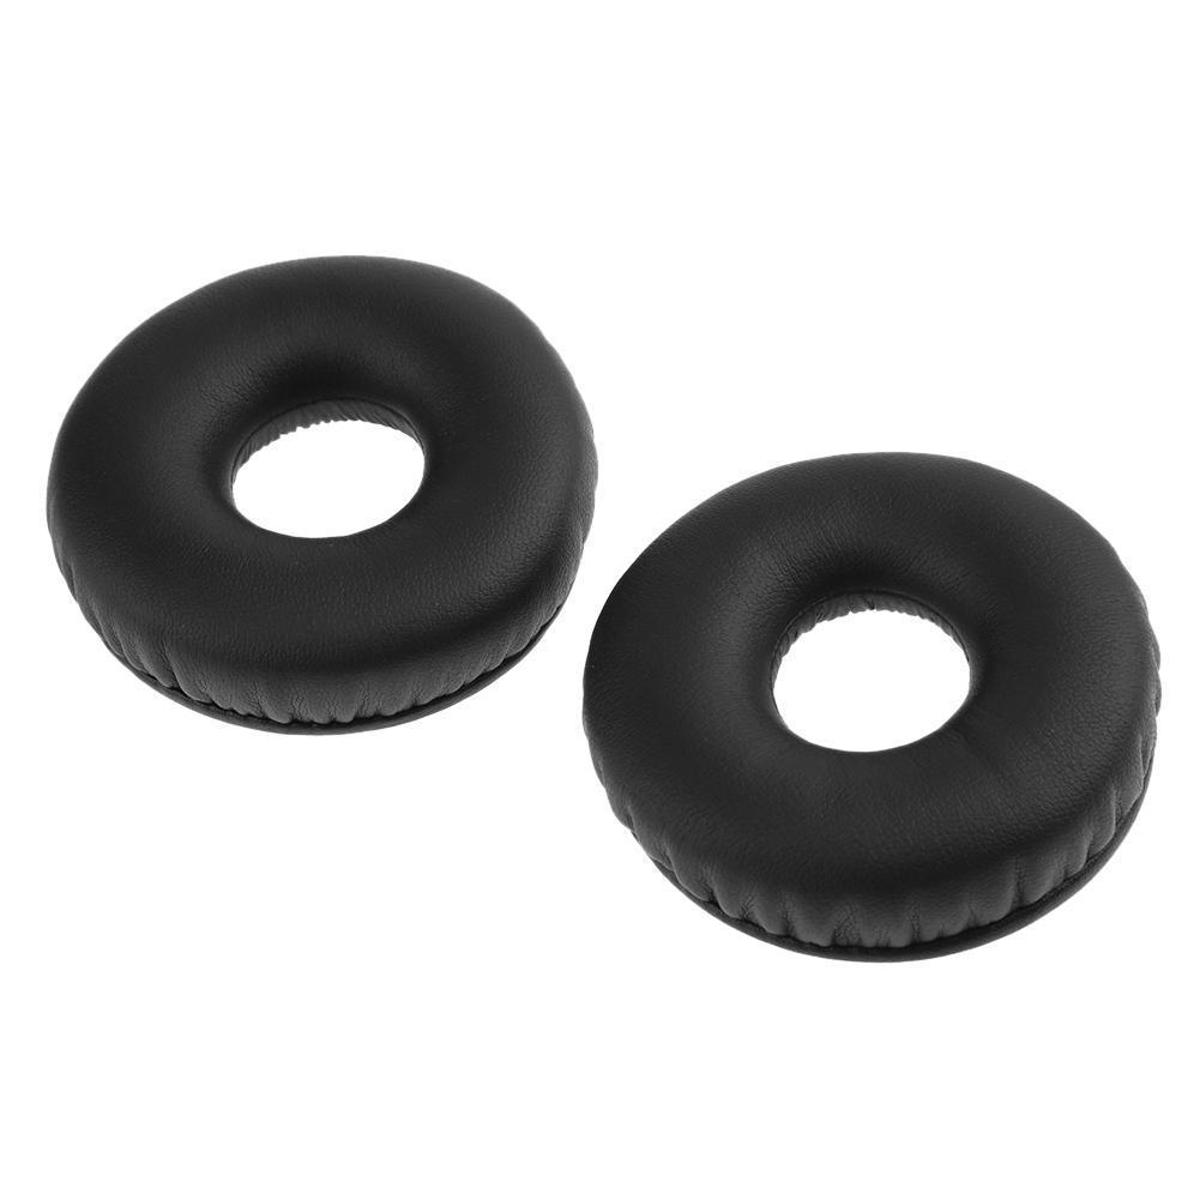 Replacement Pads 1 Pair Ear Pads Cover for Sony MDR-XB450 XB550 XB650  Headphone